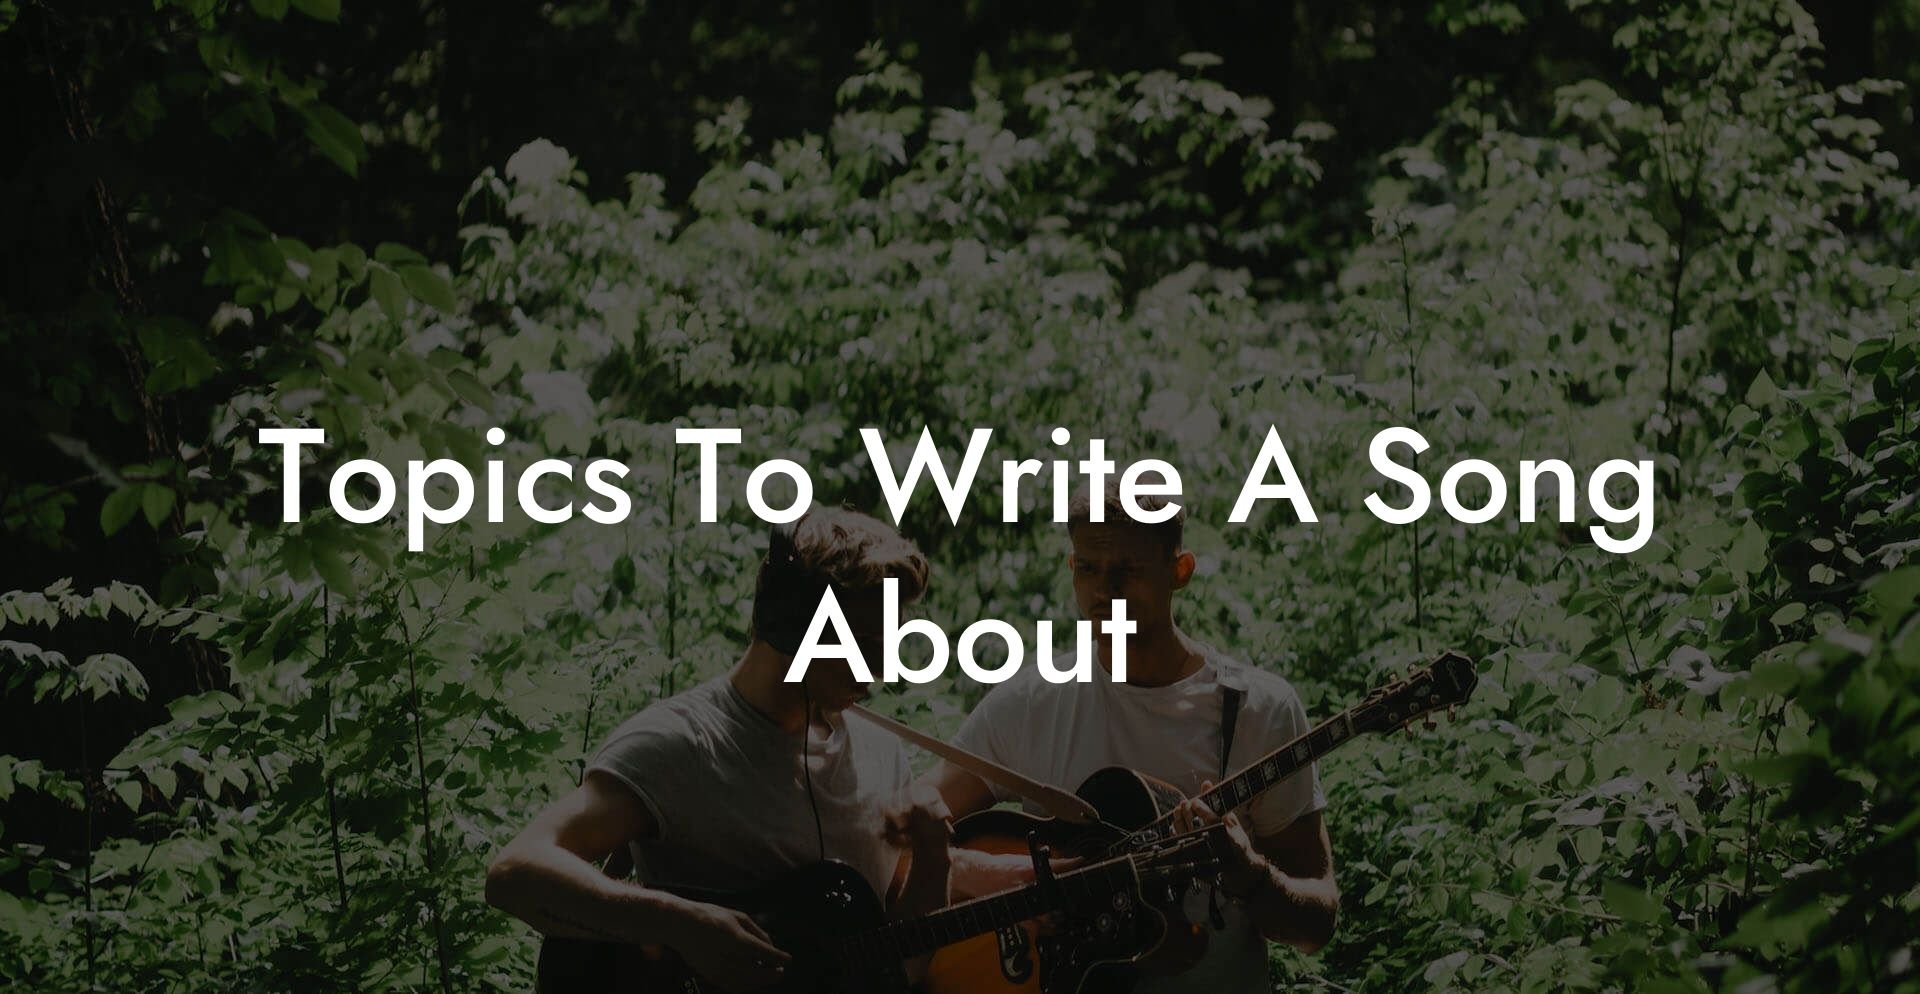 topics to write a song about lyric assistant